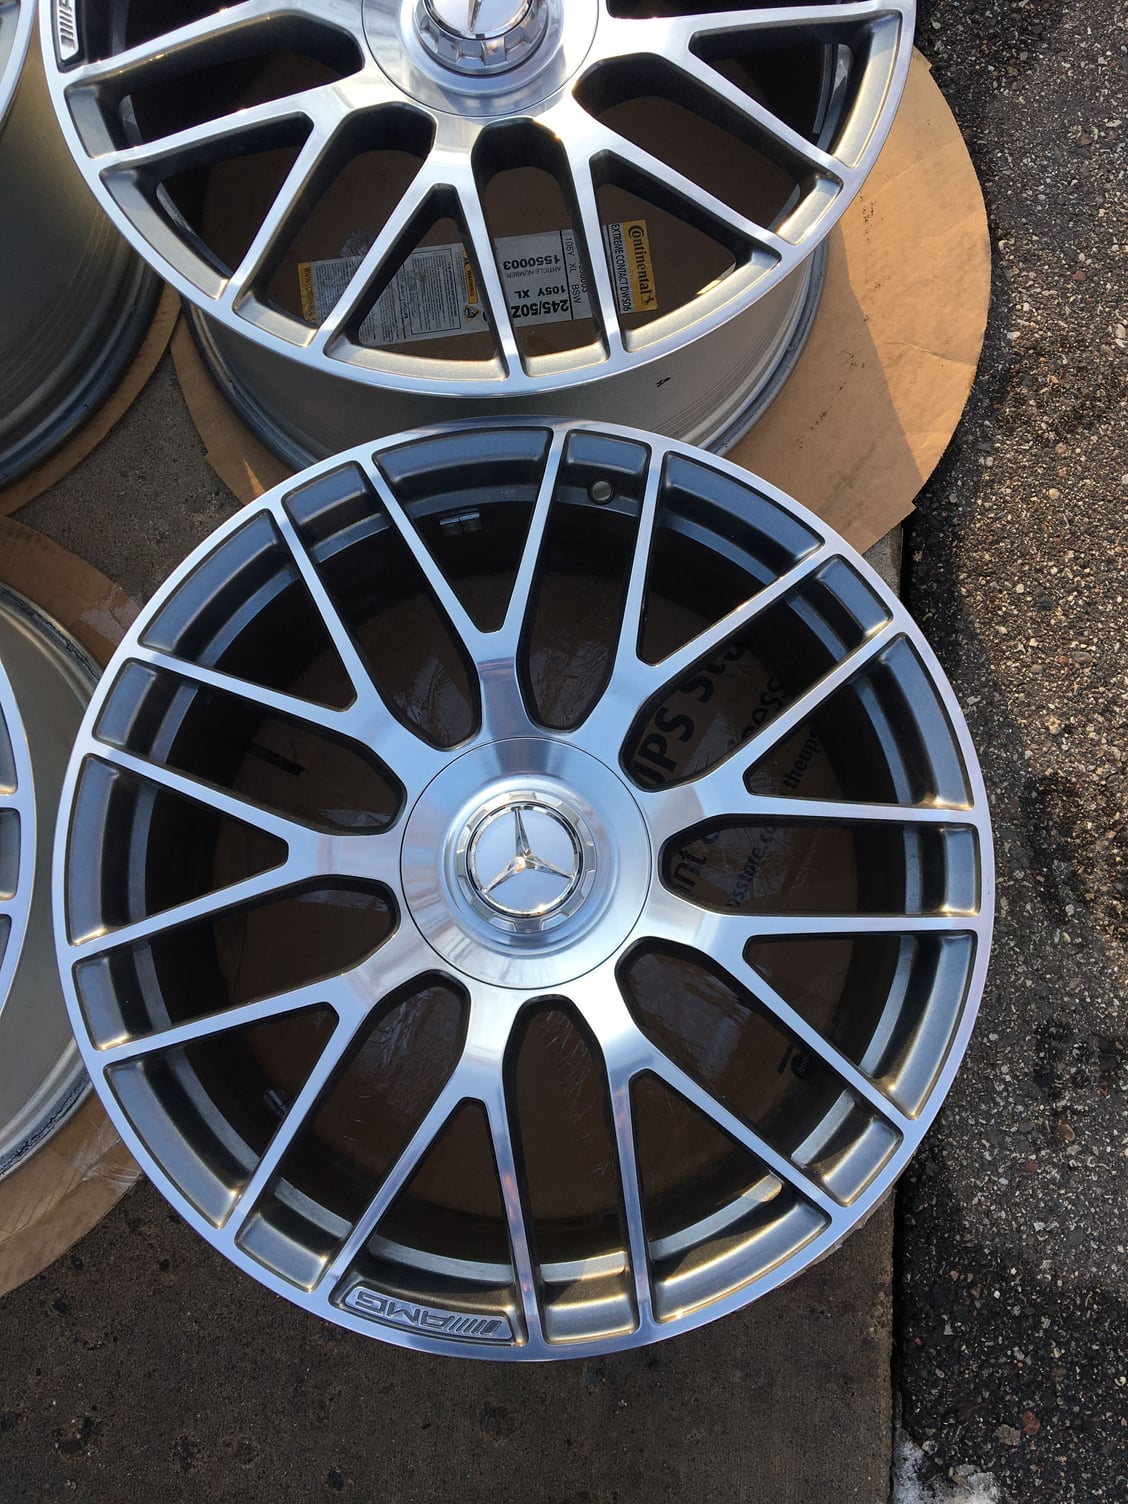 Wheels and Tires/Axles - 19" OEM Mercedes C63 AMG Wheels - EXCELLENT - C63 AMG - W205 C Class - Used - 2008 to 2017 Mercedes-Benz C63 AMG - 2008 to 2017 Mercedes-Benz C63 AMG S - Minneapolis, MN 55447, United States